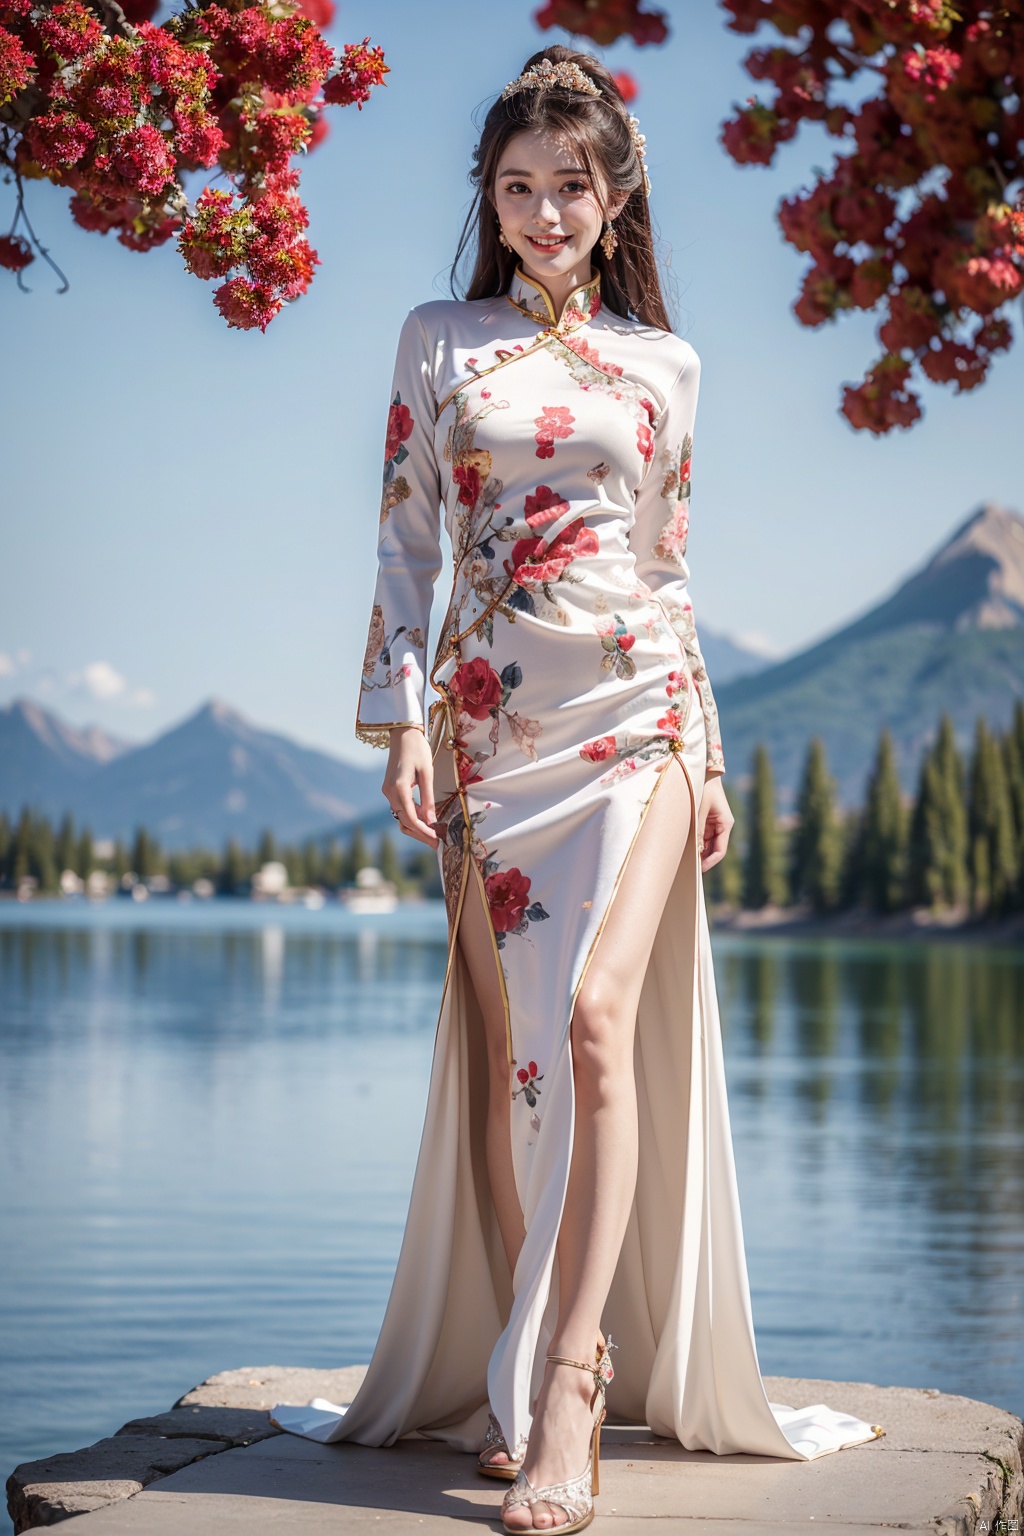  (Best quality, masterpiece, details), full body, 1 girl, beautiful face, wearing traditional Chinese clothing, white,side slit lace dress, plump figure, smile, complex clothing, floral background, details, highly detailed, full of hidden details, real skin,(mountain), (lake), an epic scene, red maple tree,